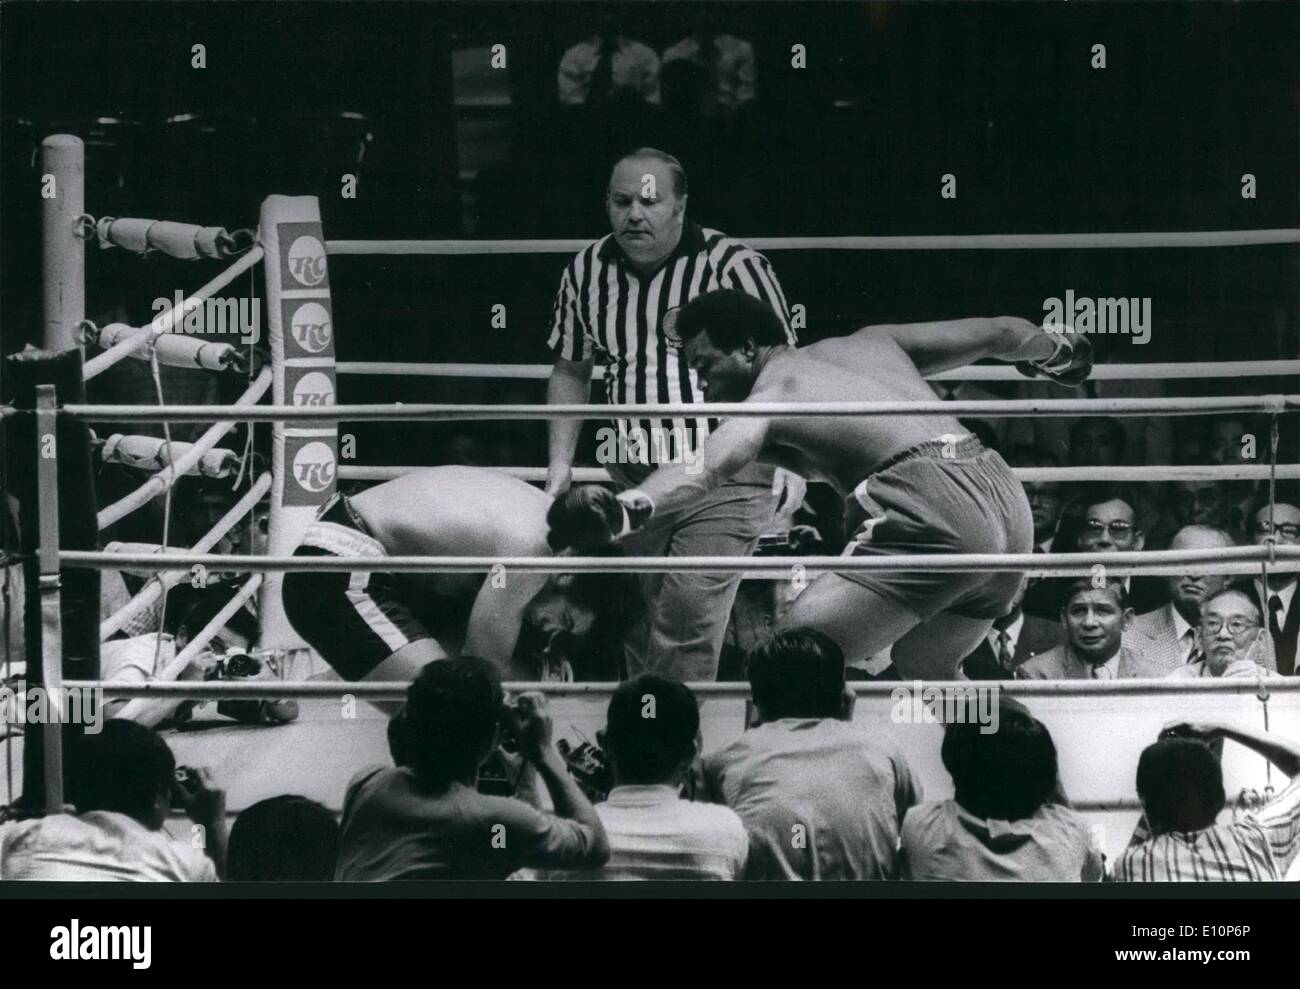 Sep. 09, 1973 - Big Fight Fiasco In Tokyo: World heavyweight champion George Foreman, disposed of his Puerto Rican Challenger Joe ''King'' Roman by a knockout within two minutes of the first round of their scheduled 15-round world title fight in Tokyo. The fight has been called a mismatch, and immediately raised questions why the match was ever allowed to take place. It was the first heavyweight title match to staged in Japan, and Yen 50,000 (almost 5) was paid for ringside seats, many want their money back, or will settle for half, and called the fight a fraud Stock Photo